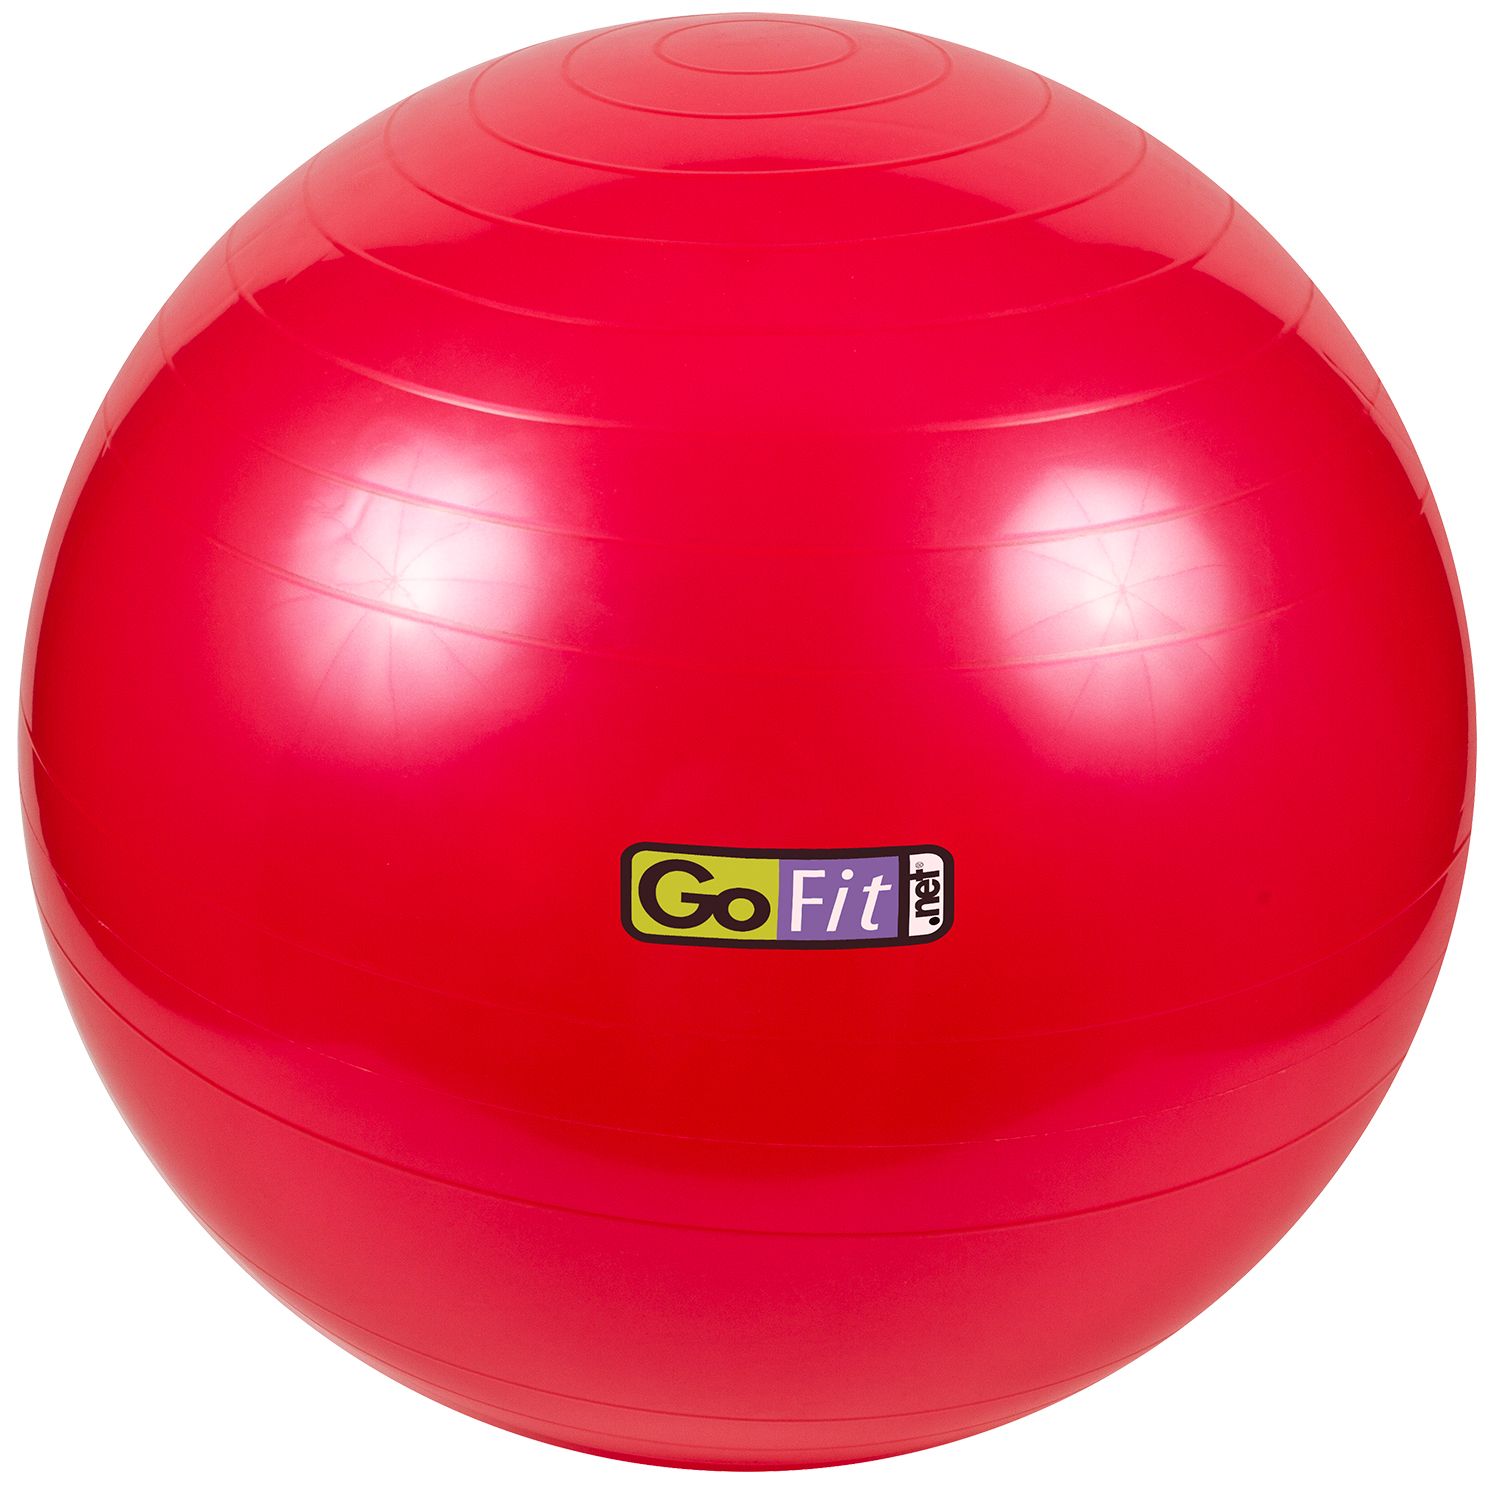 GoFit 55 cm Exercise Ball | DICK'S Sporting Goods